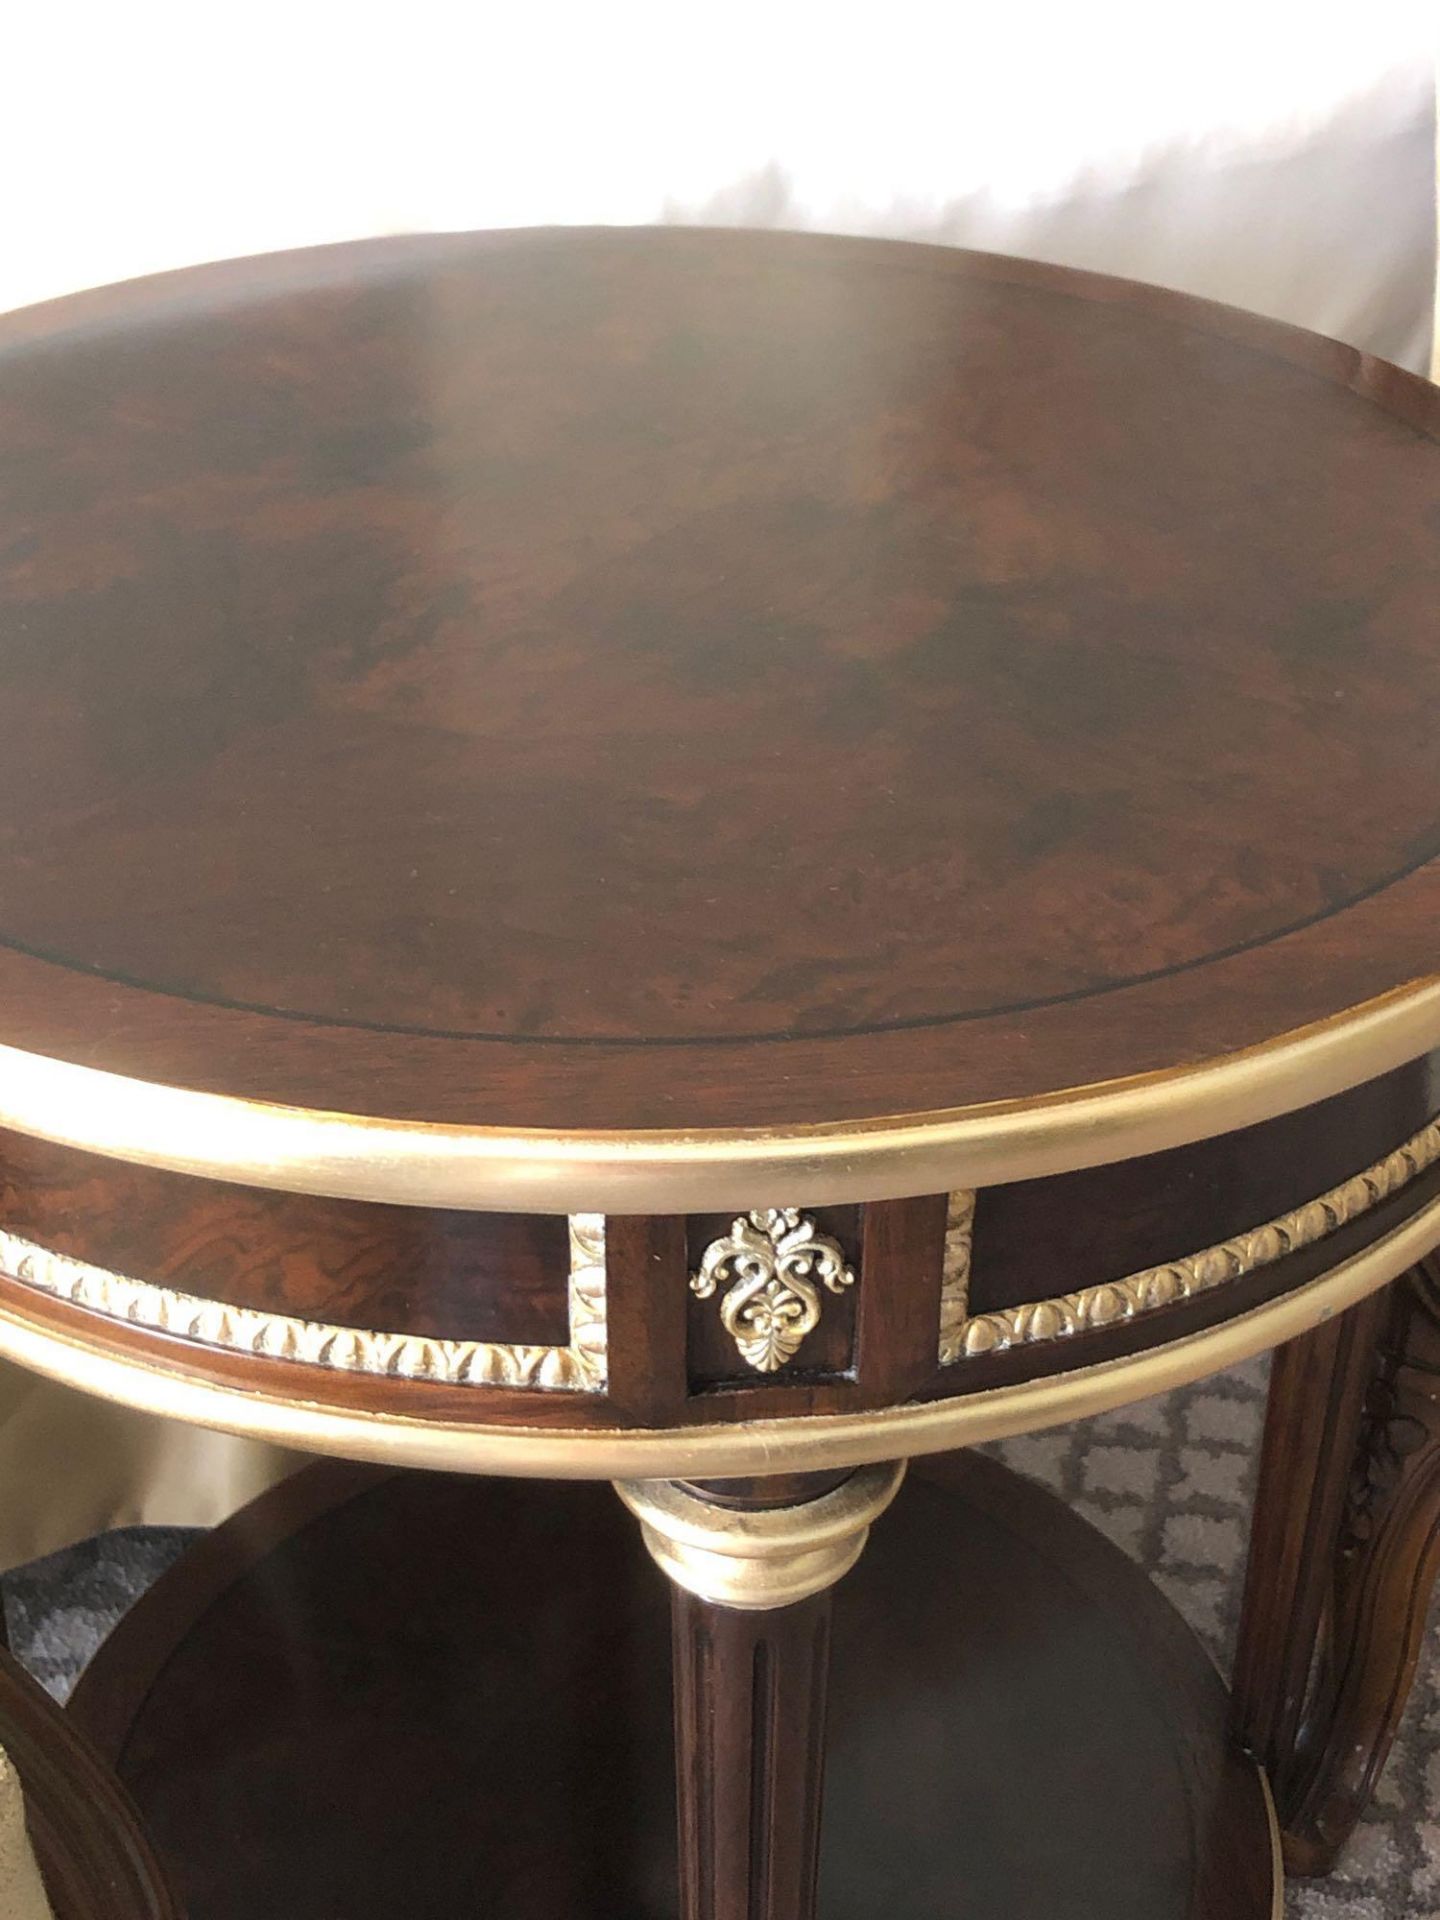 Circular Side Table With Antiqued Plate Top And Brass Trim Mounted On Tapering Legs With Brass - Image 3 of 3